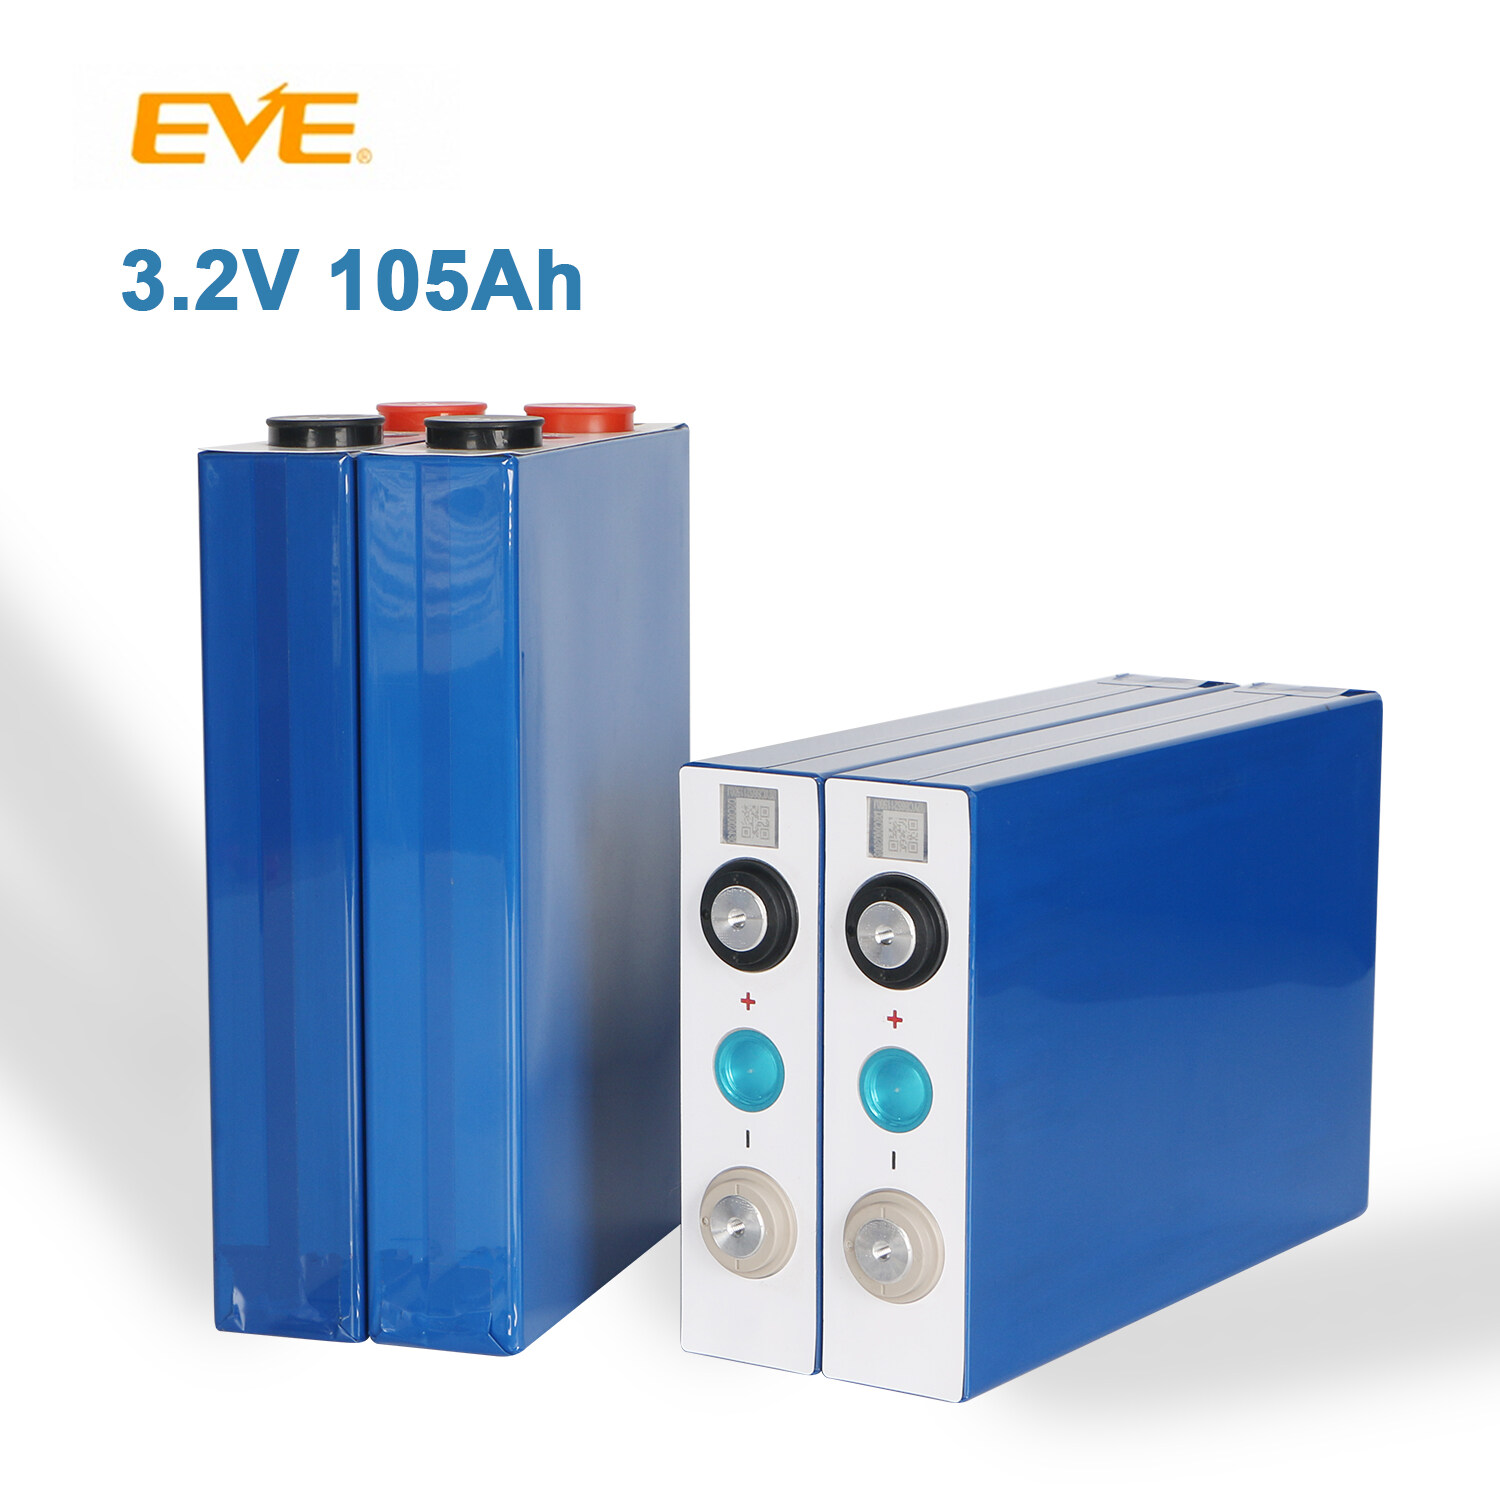 EVE 3.2V 105Ah LiFePO4 Lithium iron phosphate battery Cell